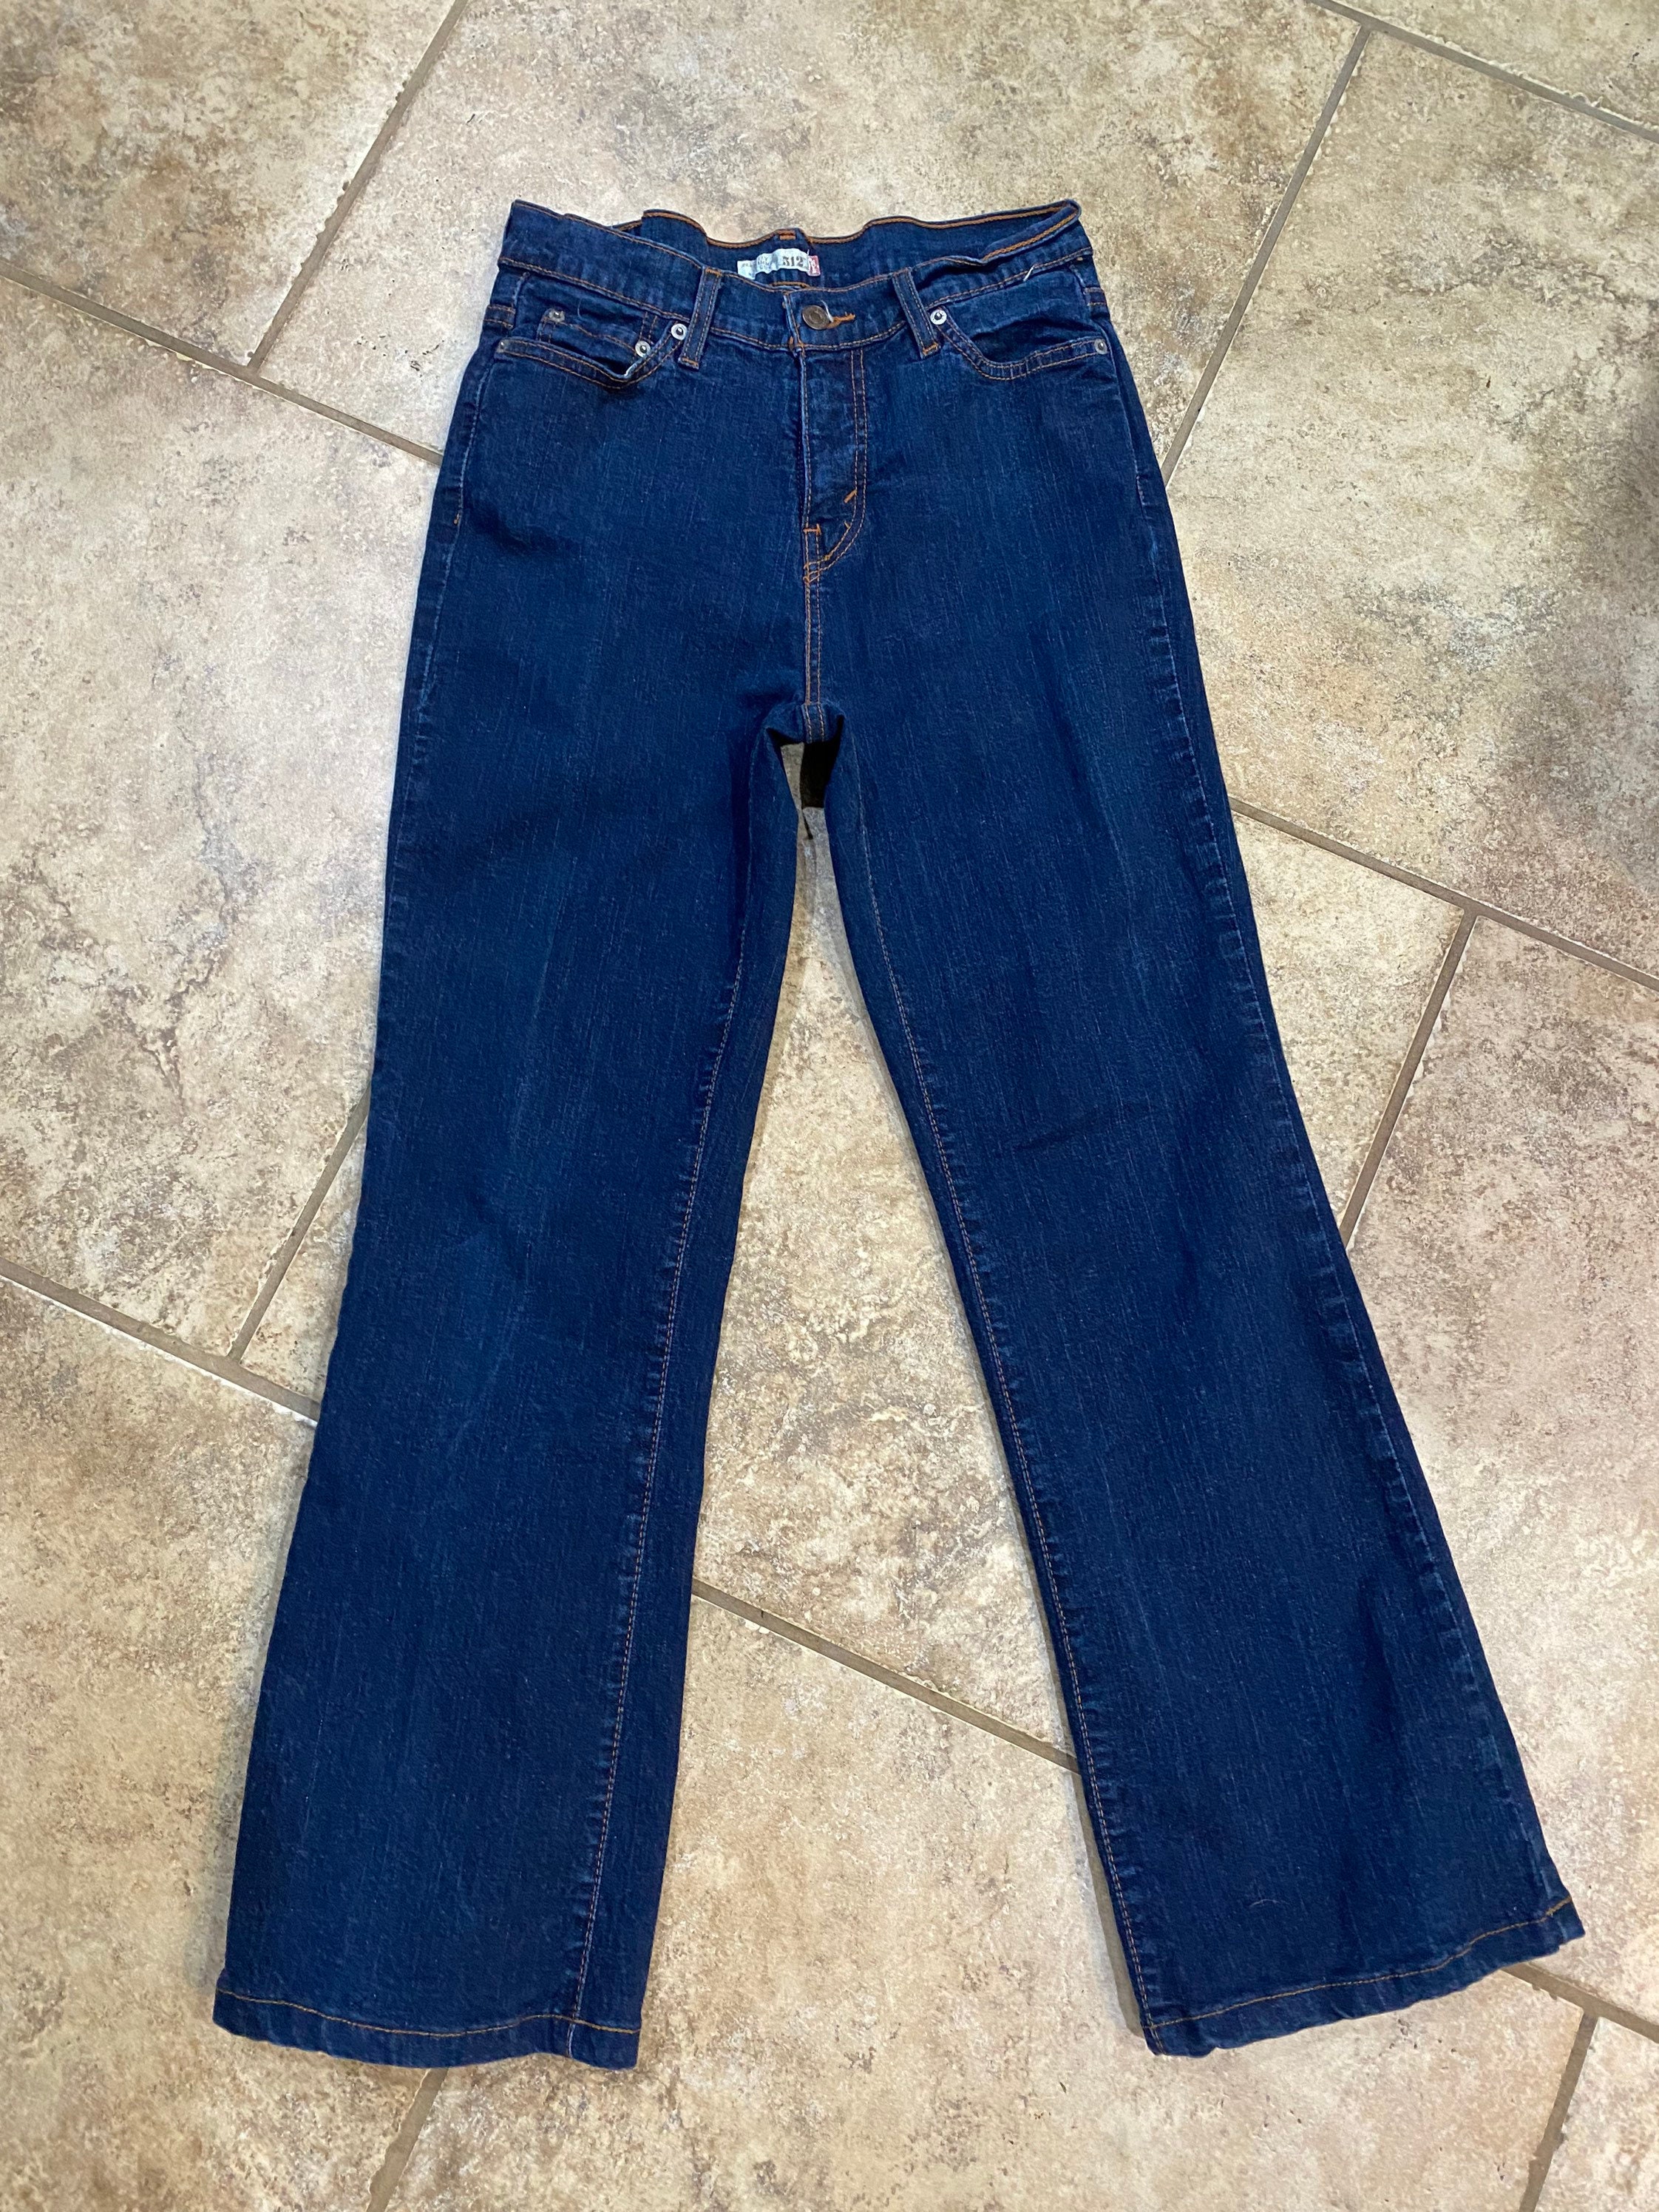 Levi Strauss 512 Womens Perfectly Slimming Boot cut size 8 | Etsy